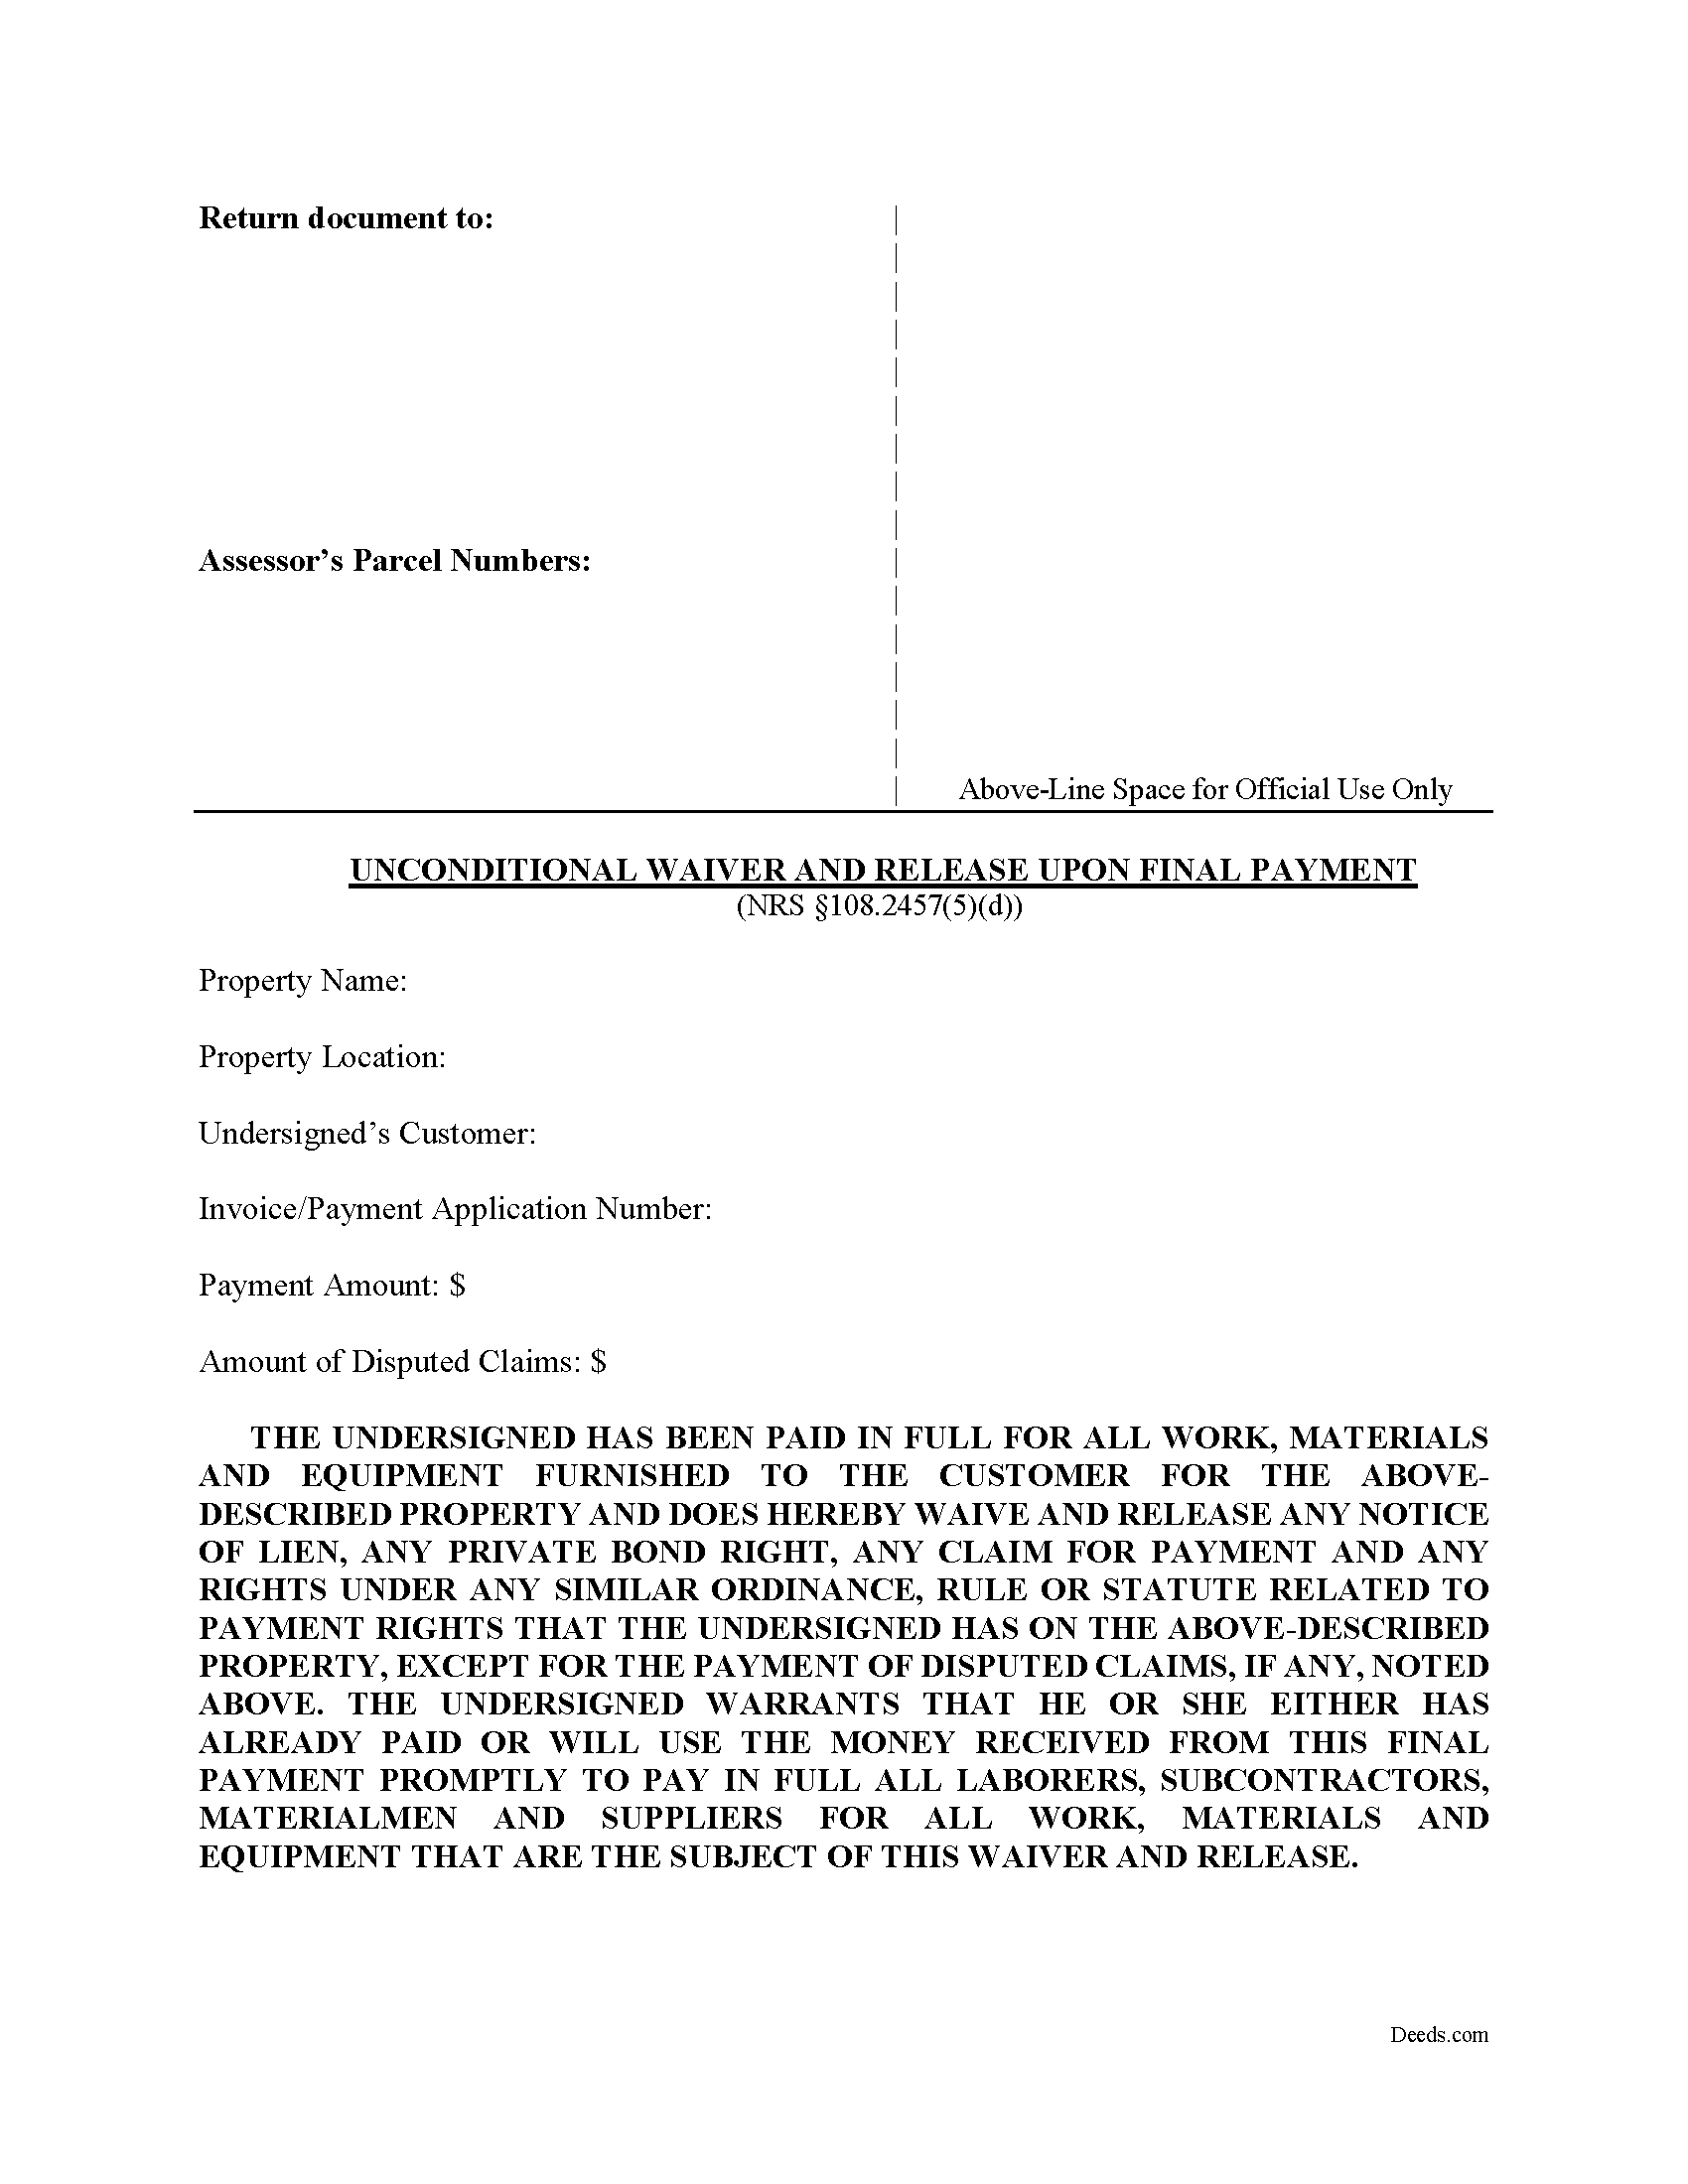 Unconditional Final Waiver of Lien